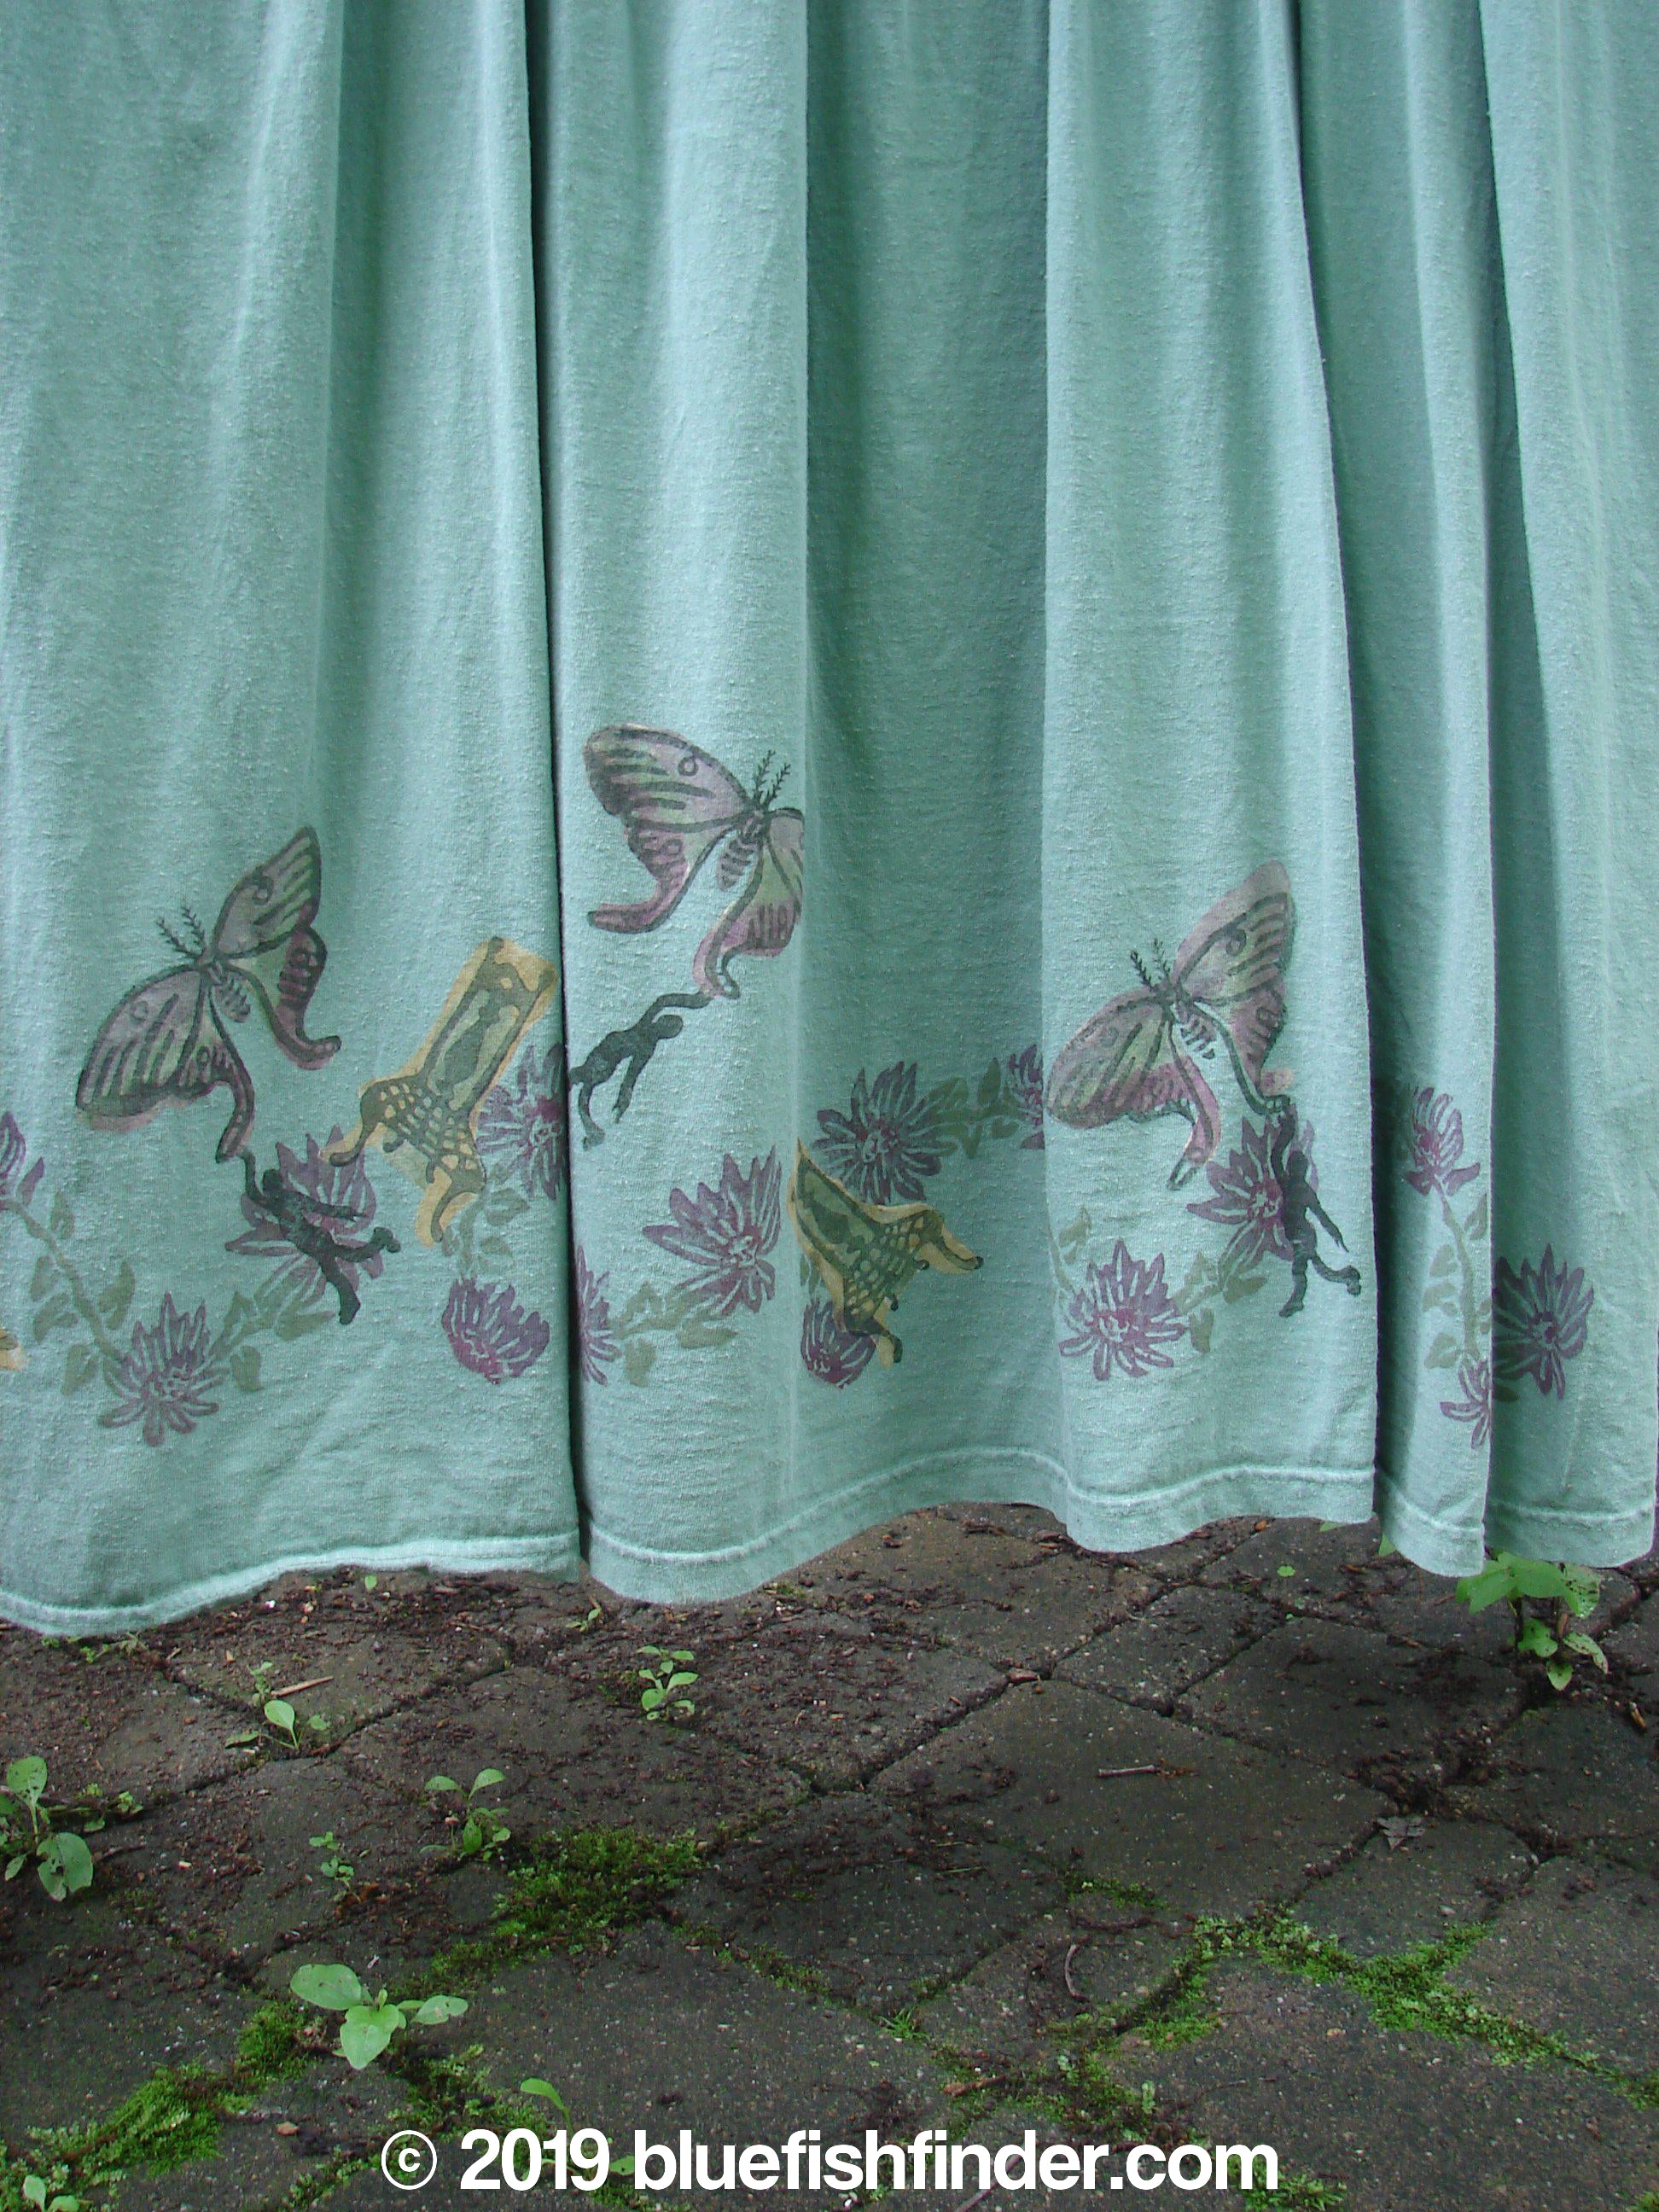 Image alt text: 1994 Side Button Jumper Butterfly Garden River Size 1 - A curtain with butterflies and flowers, featuring a close-up of a stone surface, a painting, and a fabric with a person and flowers.